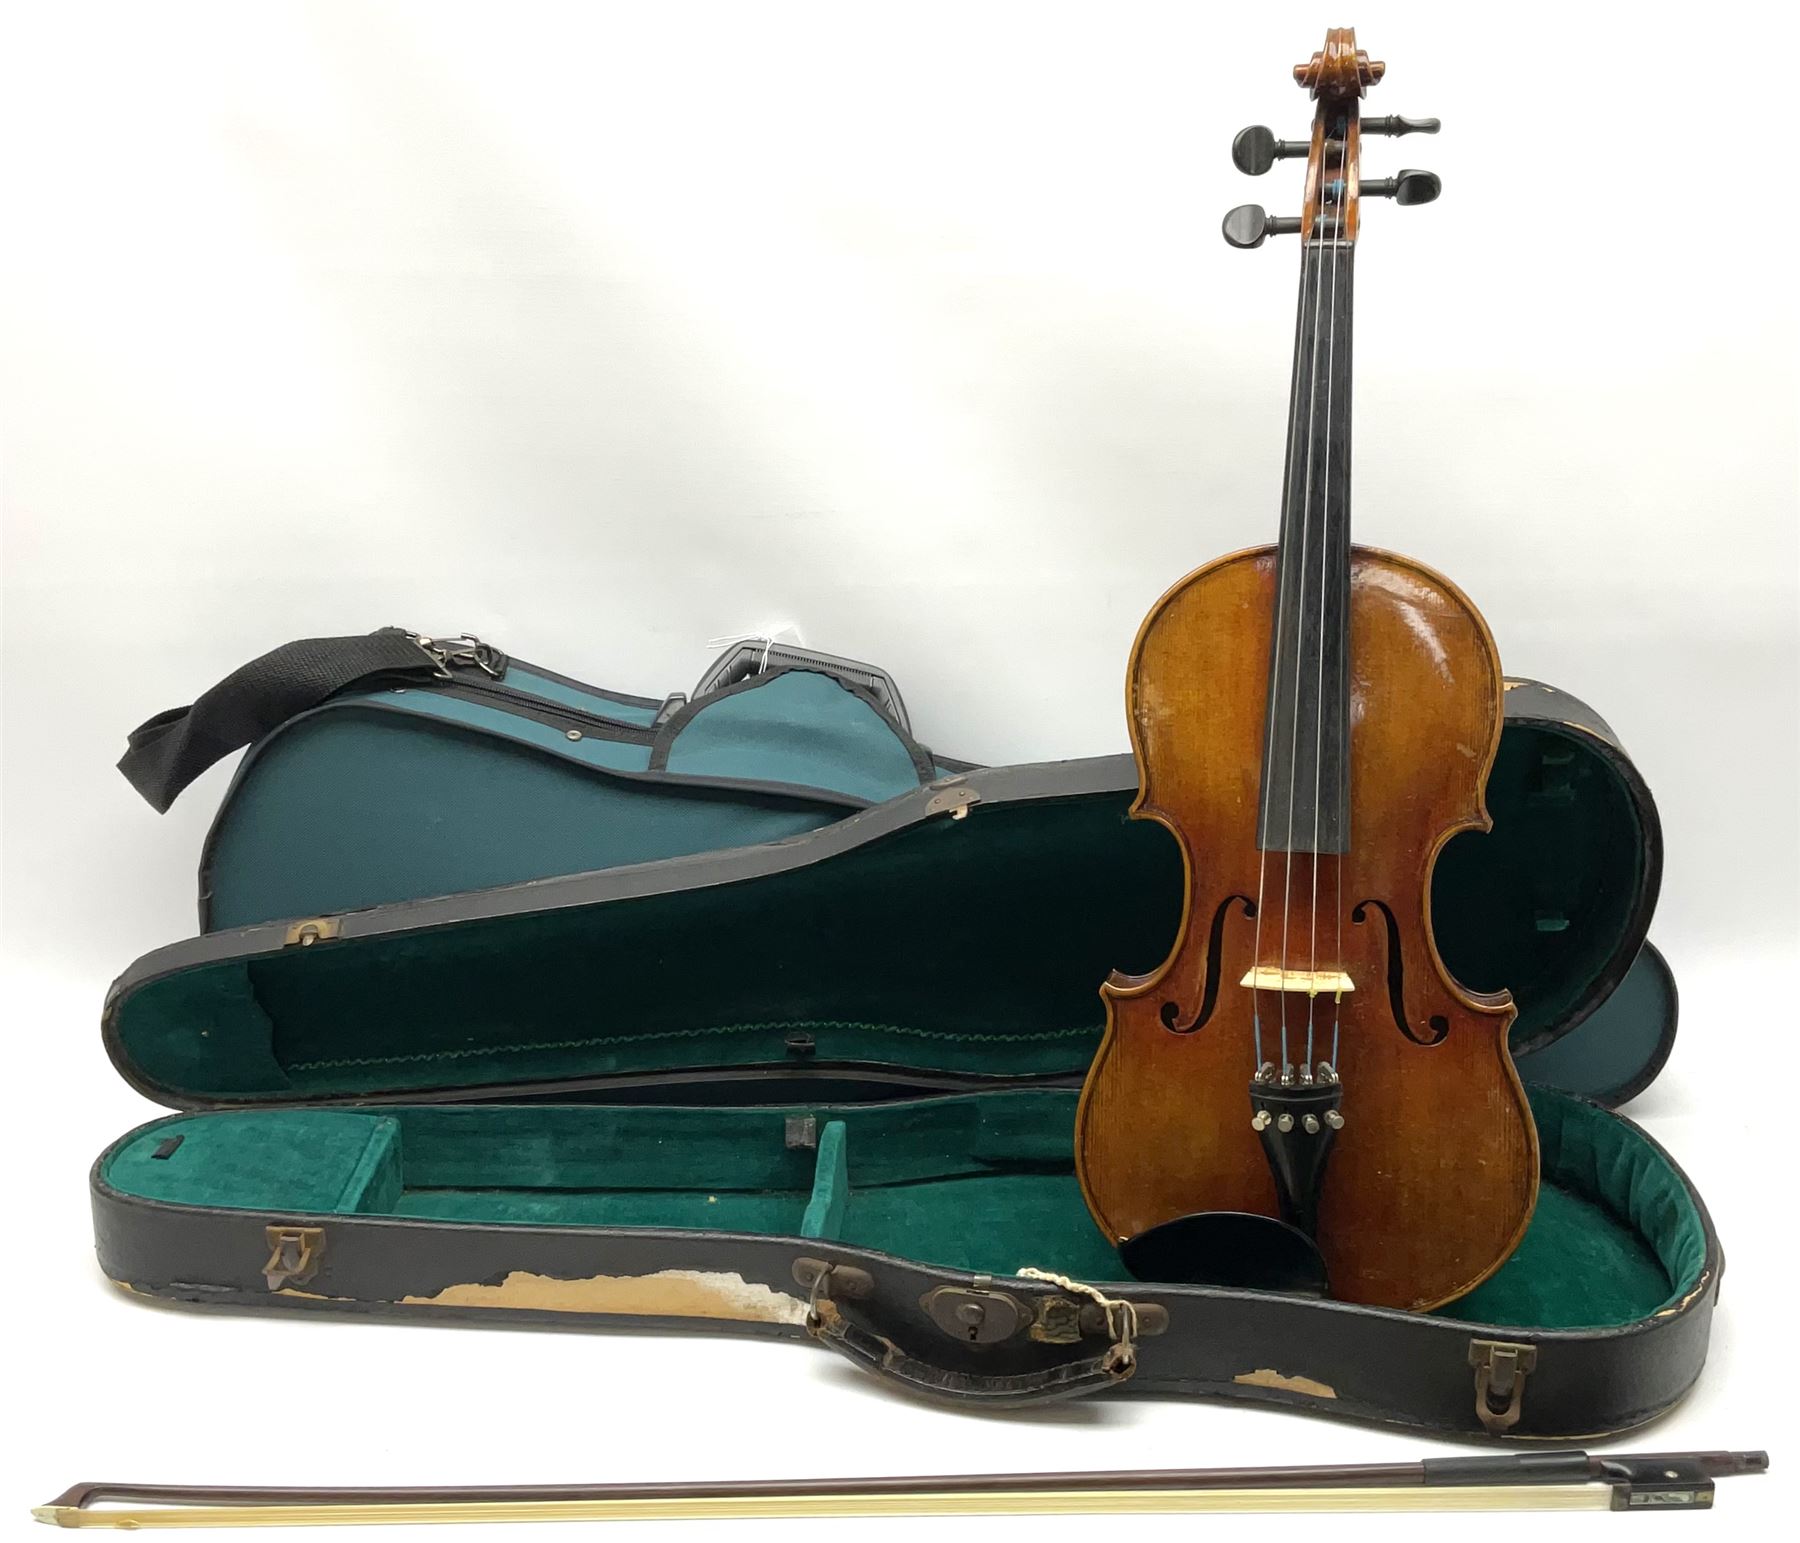 French violin c1900 with 36cm one-piece maple back and ribs and spruce top